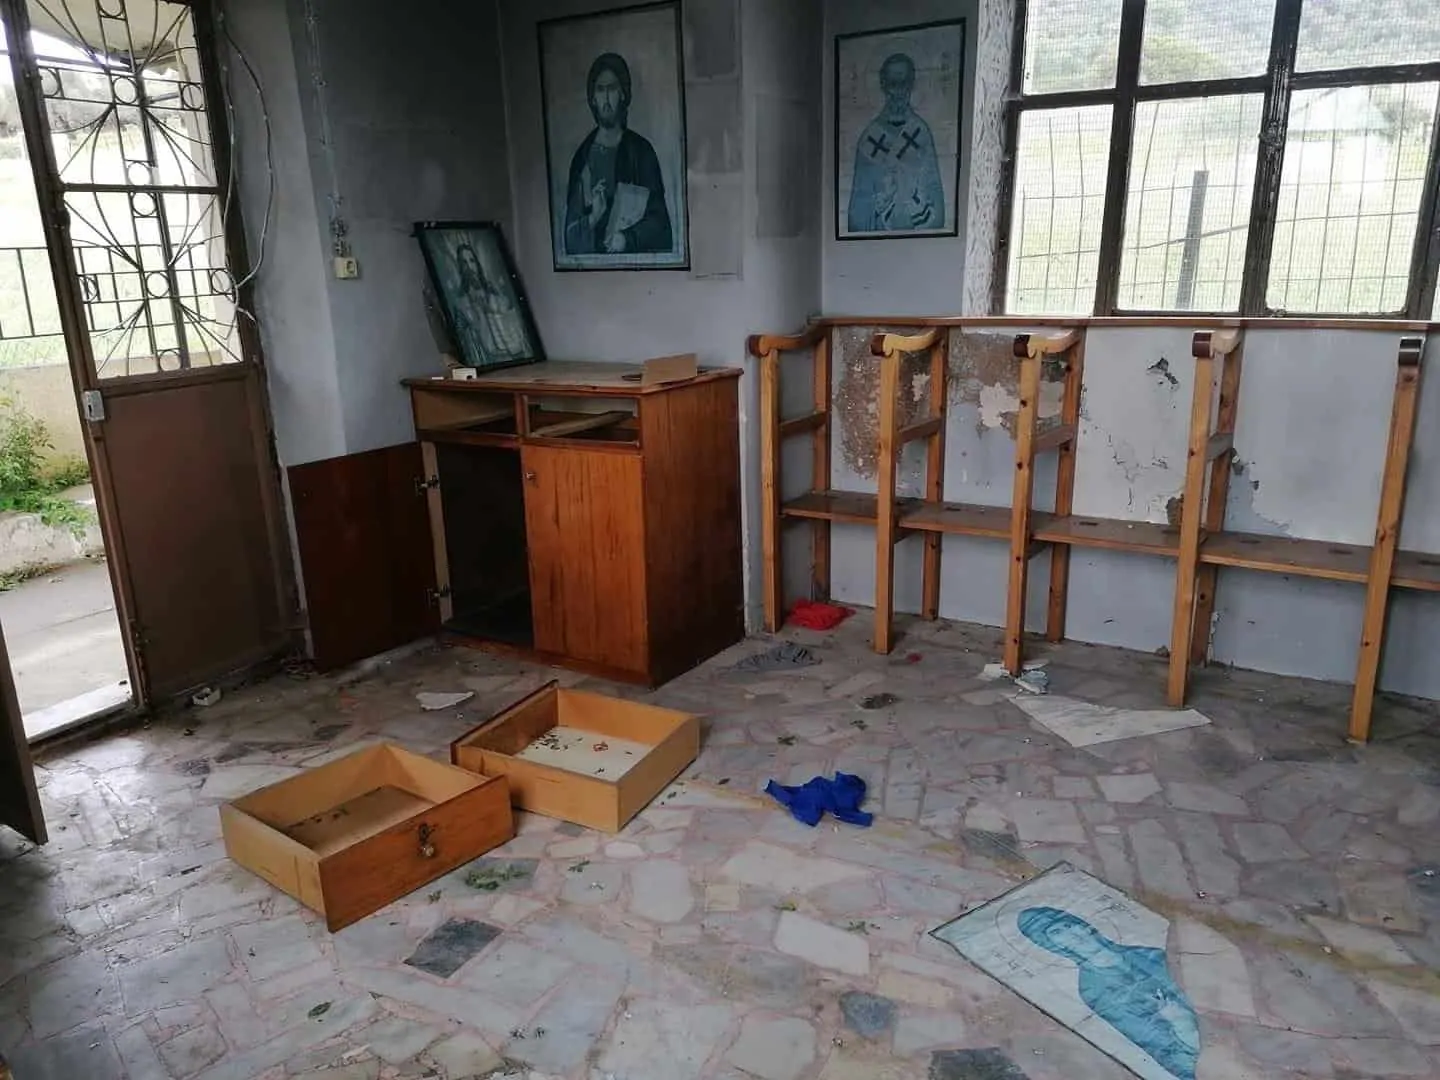 Church vandalised by illegal immigrants in Lesvos, is fully restored by volunteers 8